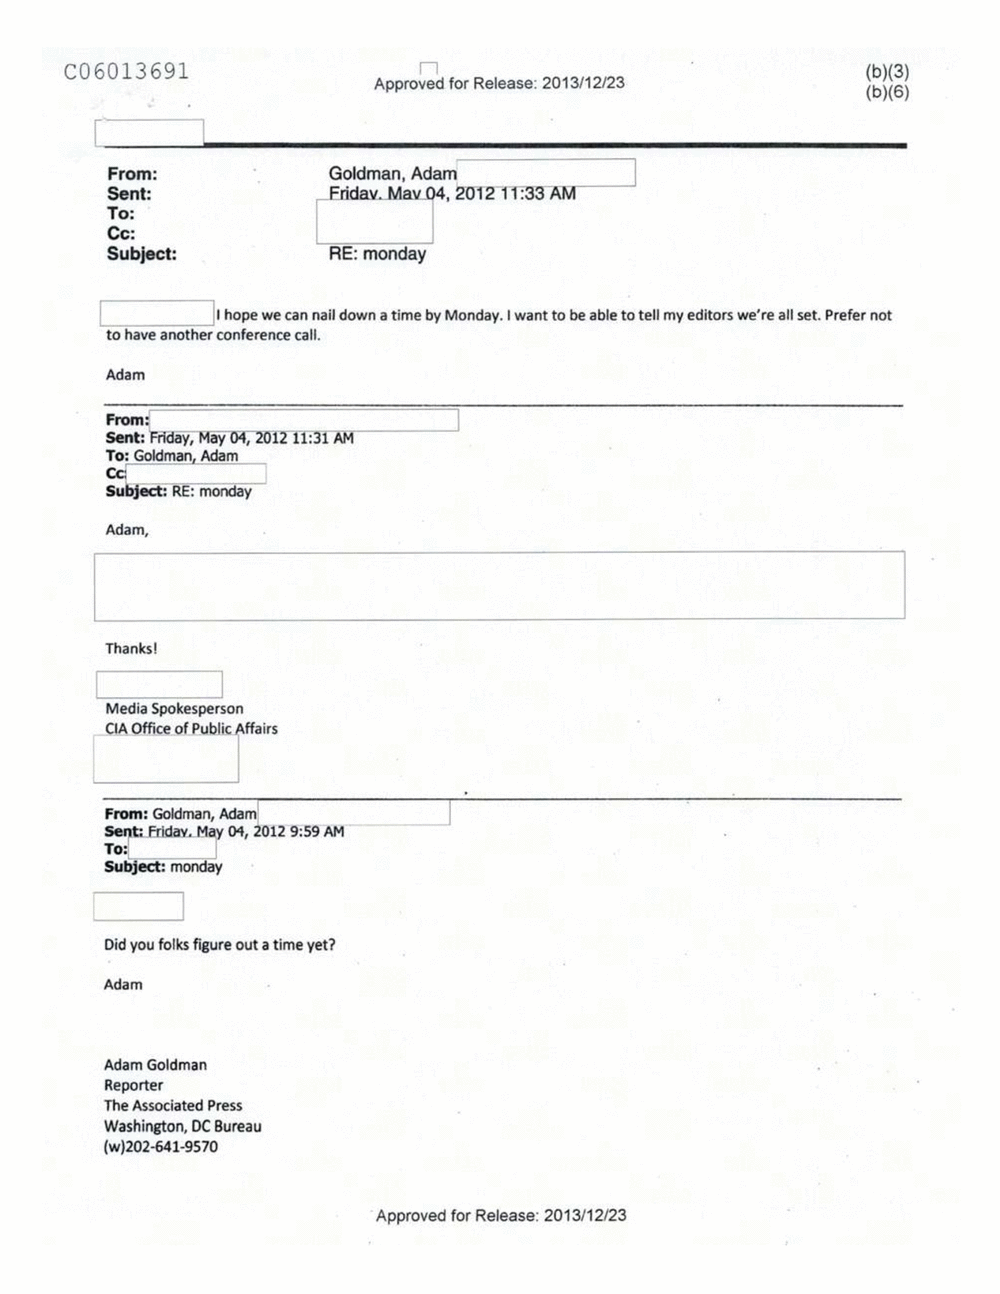 Page 550 from Email Correspondence Between Reporters and CIA Flacks